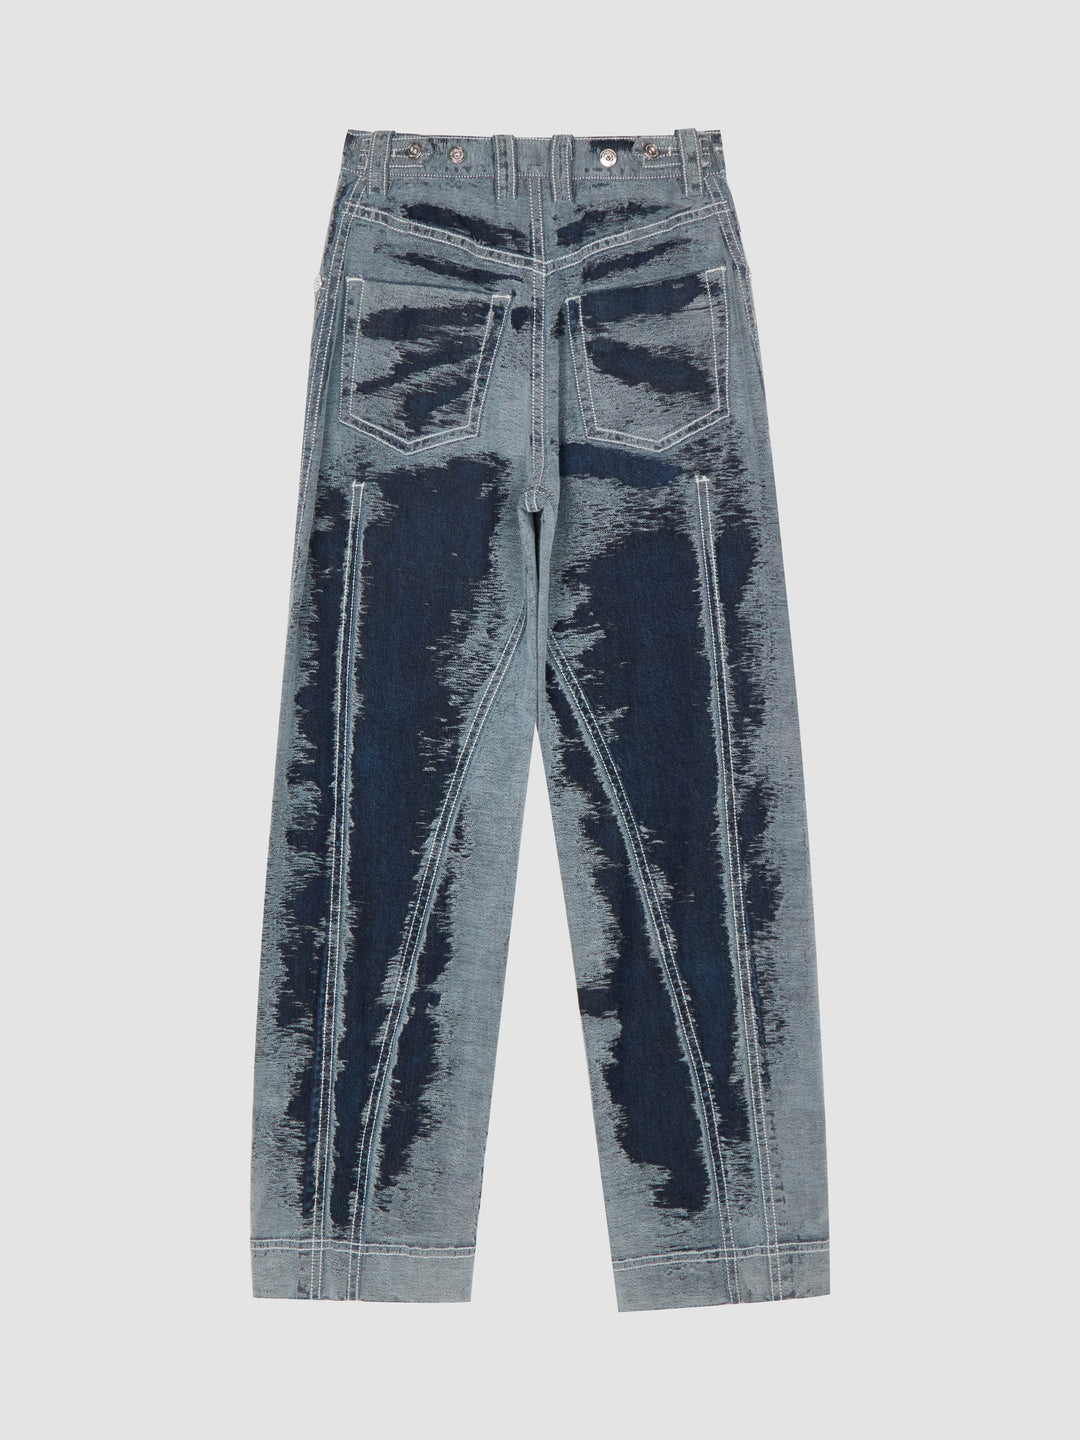 HANDMADE SCRATCHED RELAXED FITTED JEANS